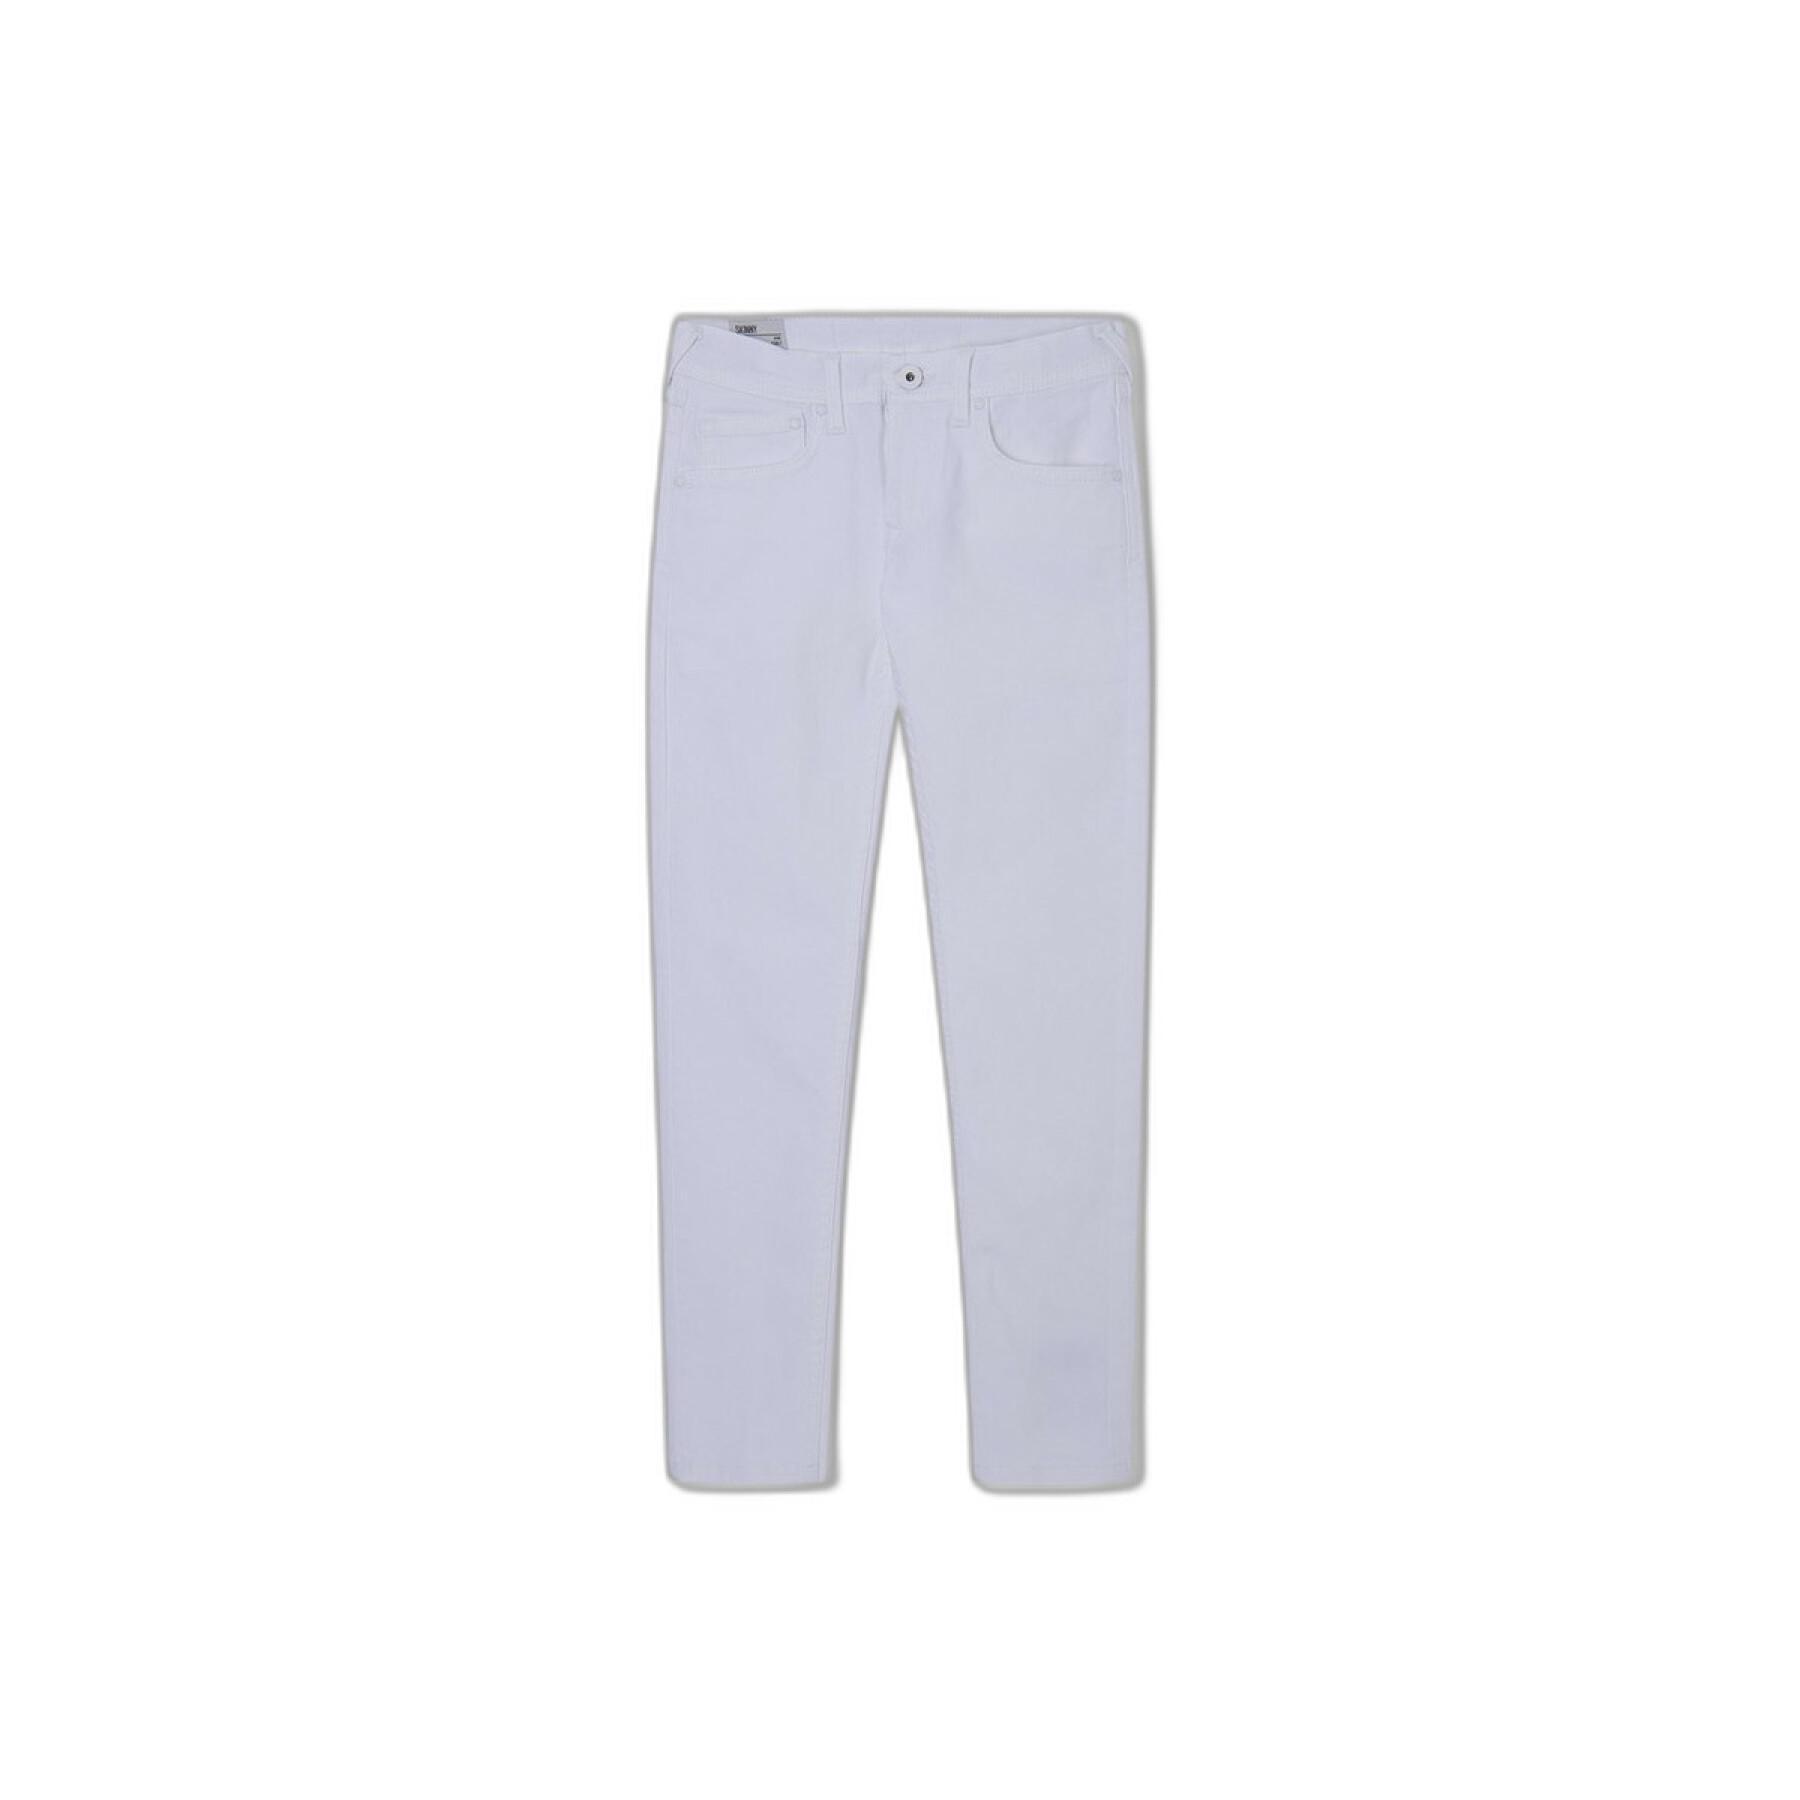 Children's chino pants Pepe Jeans Finly